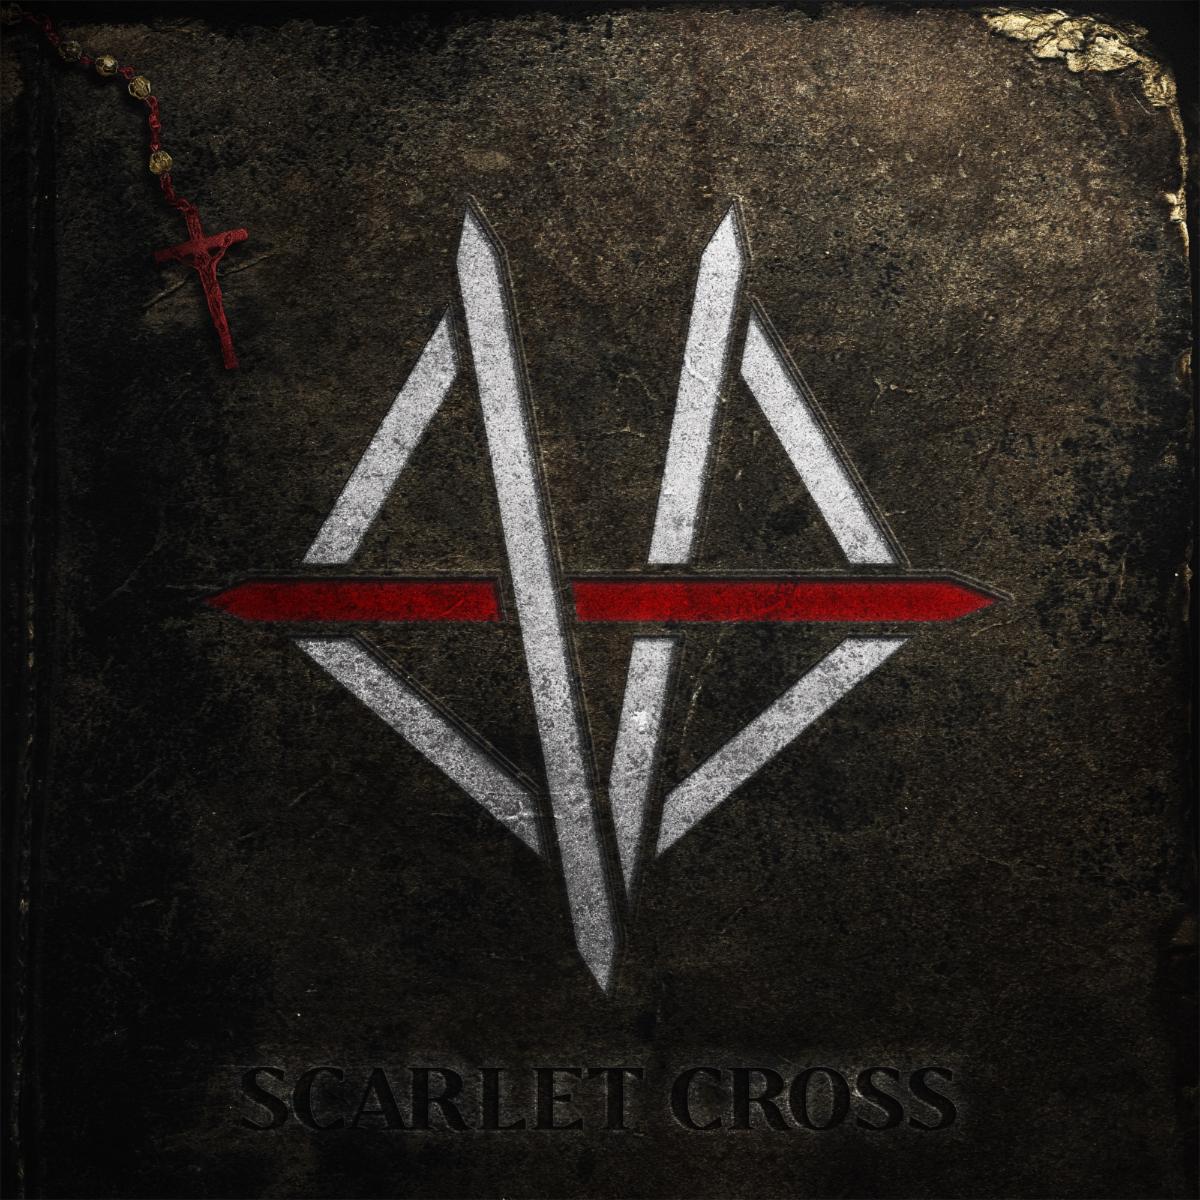 BLACK VEIL BRIDES Return With New Song “Scarlet Cross” - Epic Video Out Now